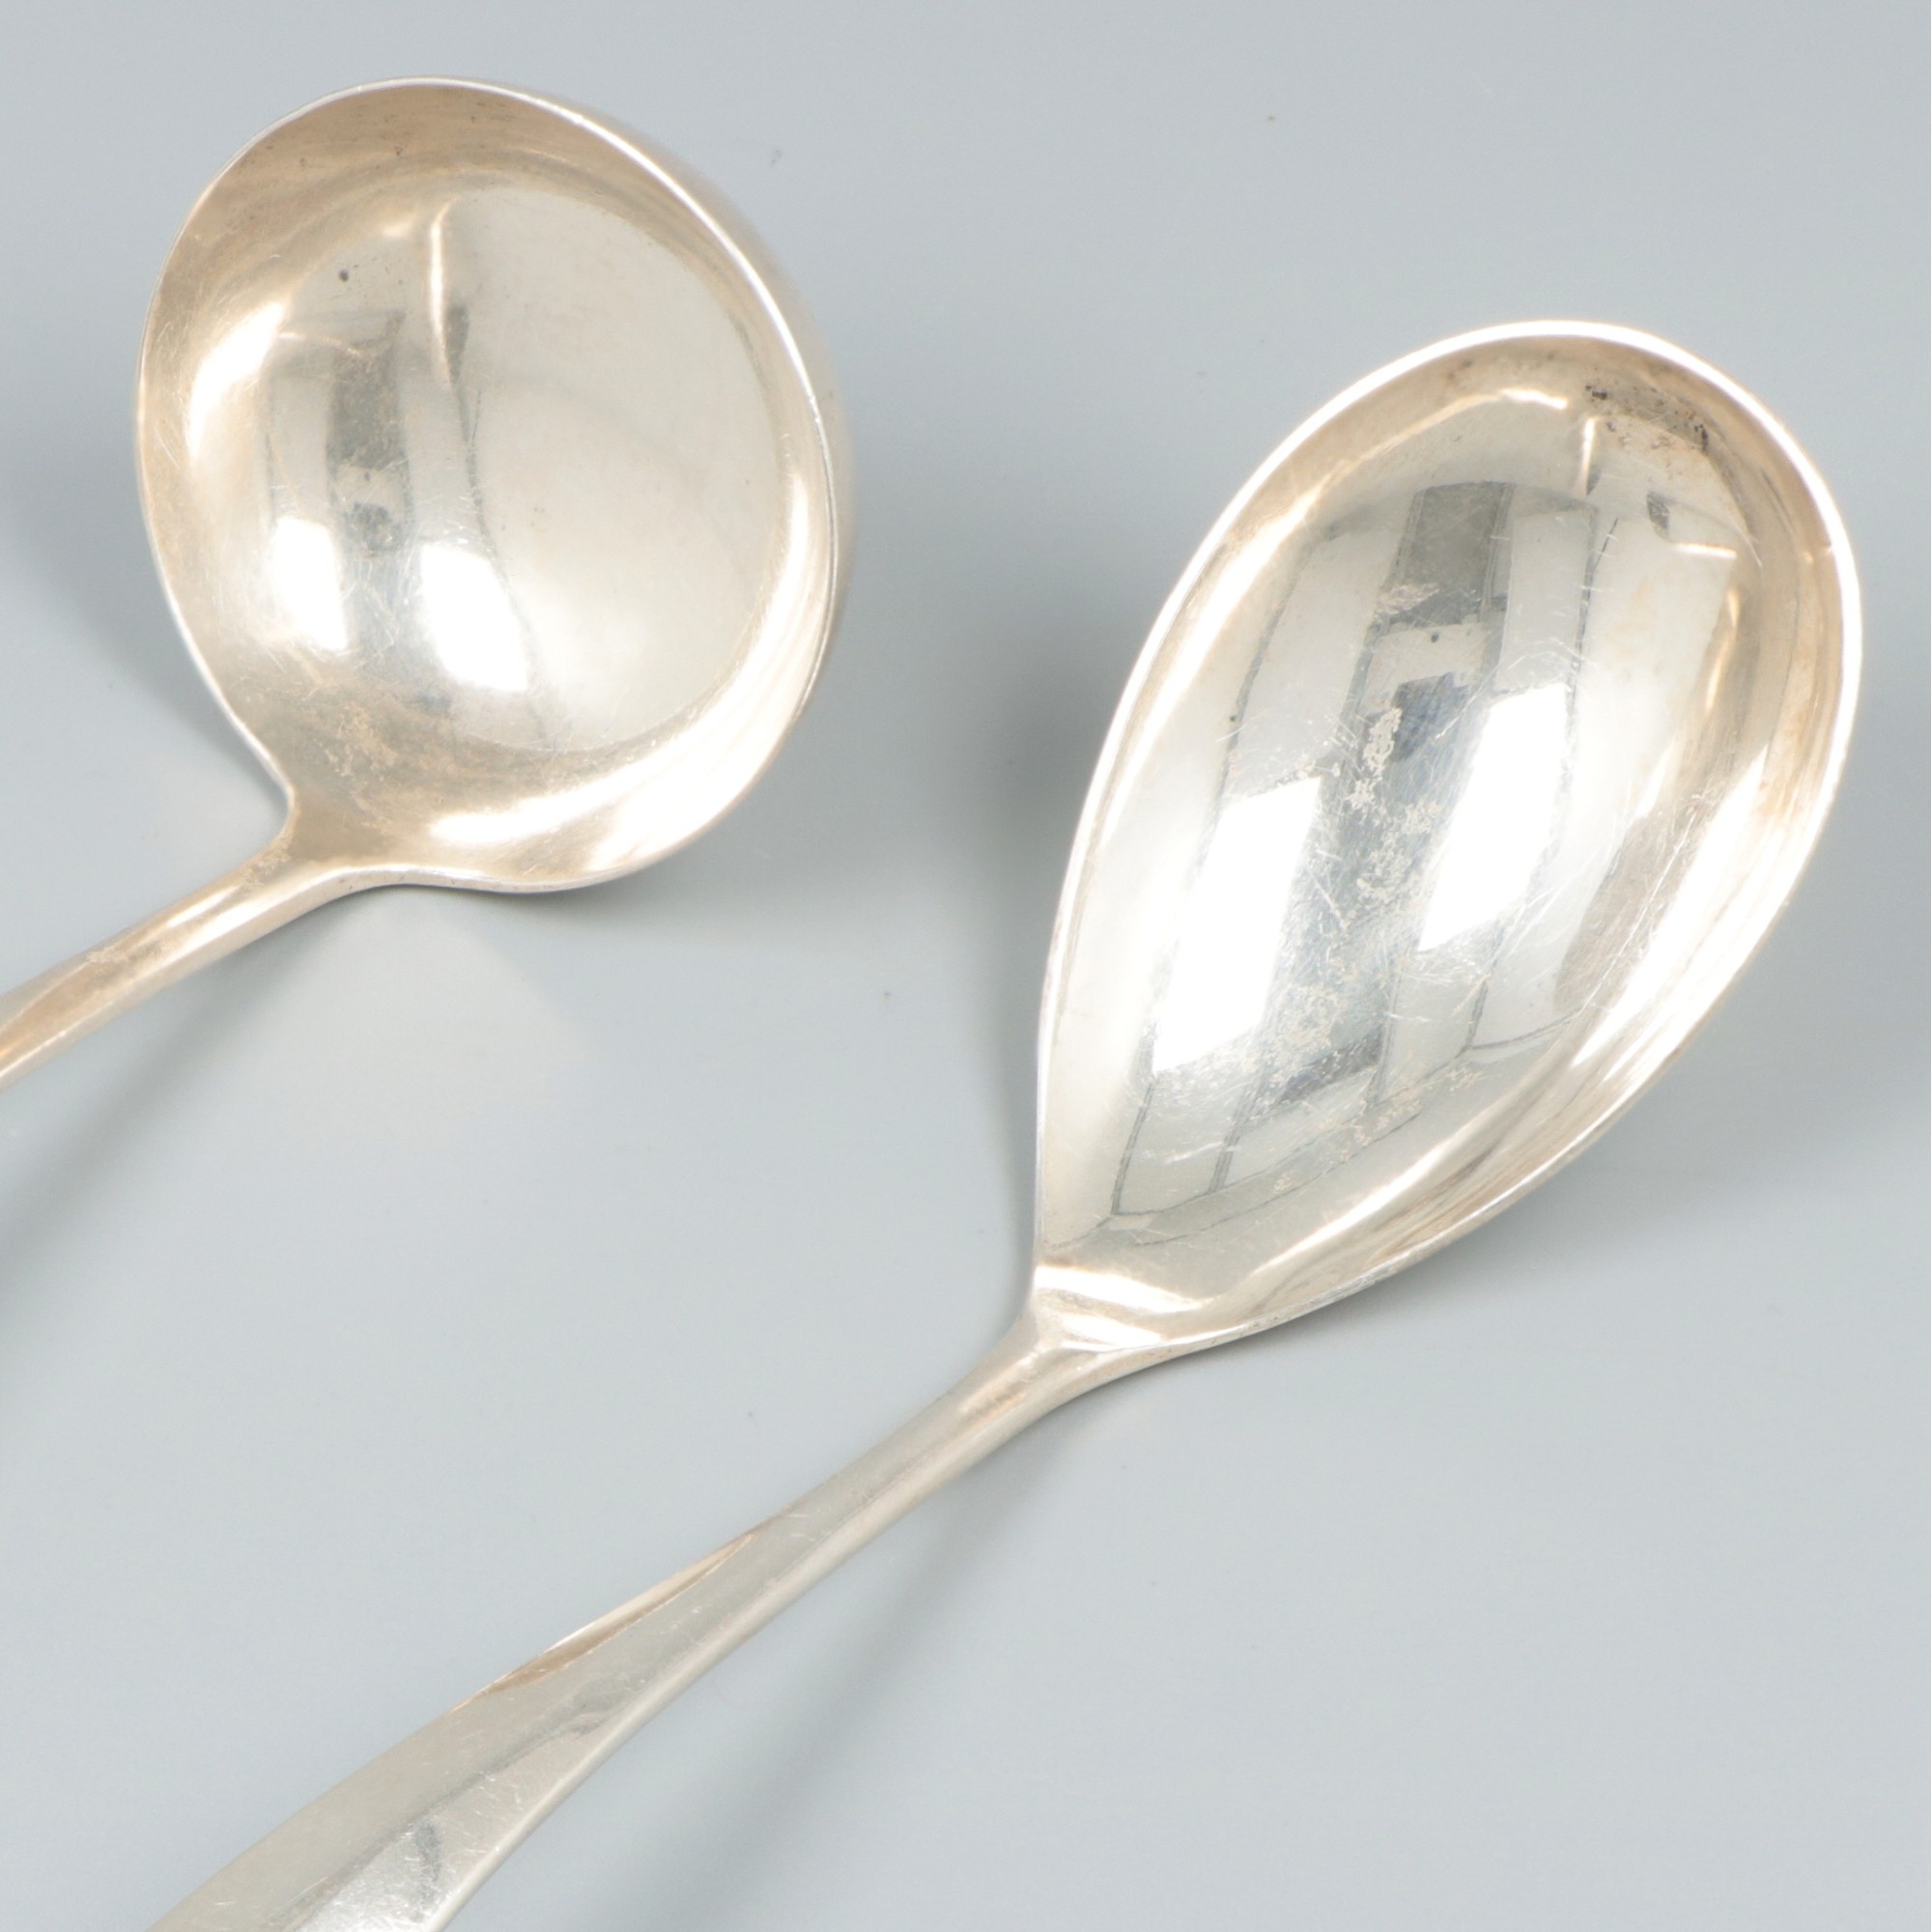 Sauce spoon & compote spoon "Haags Lofje", silver. - Image 2 of 5